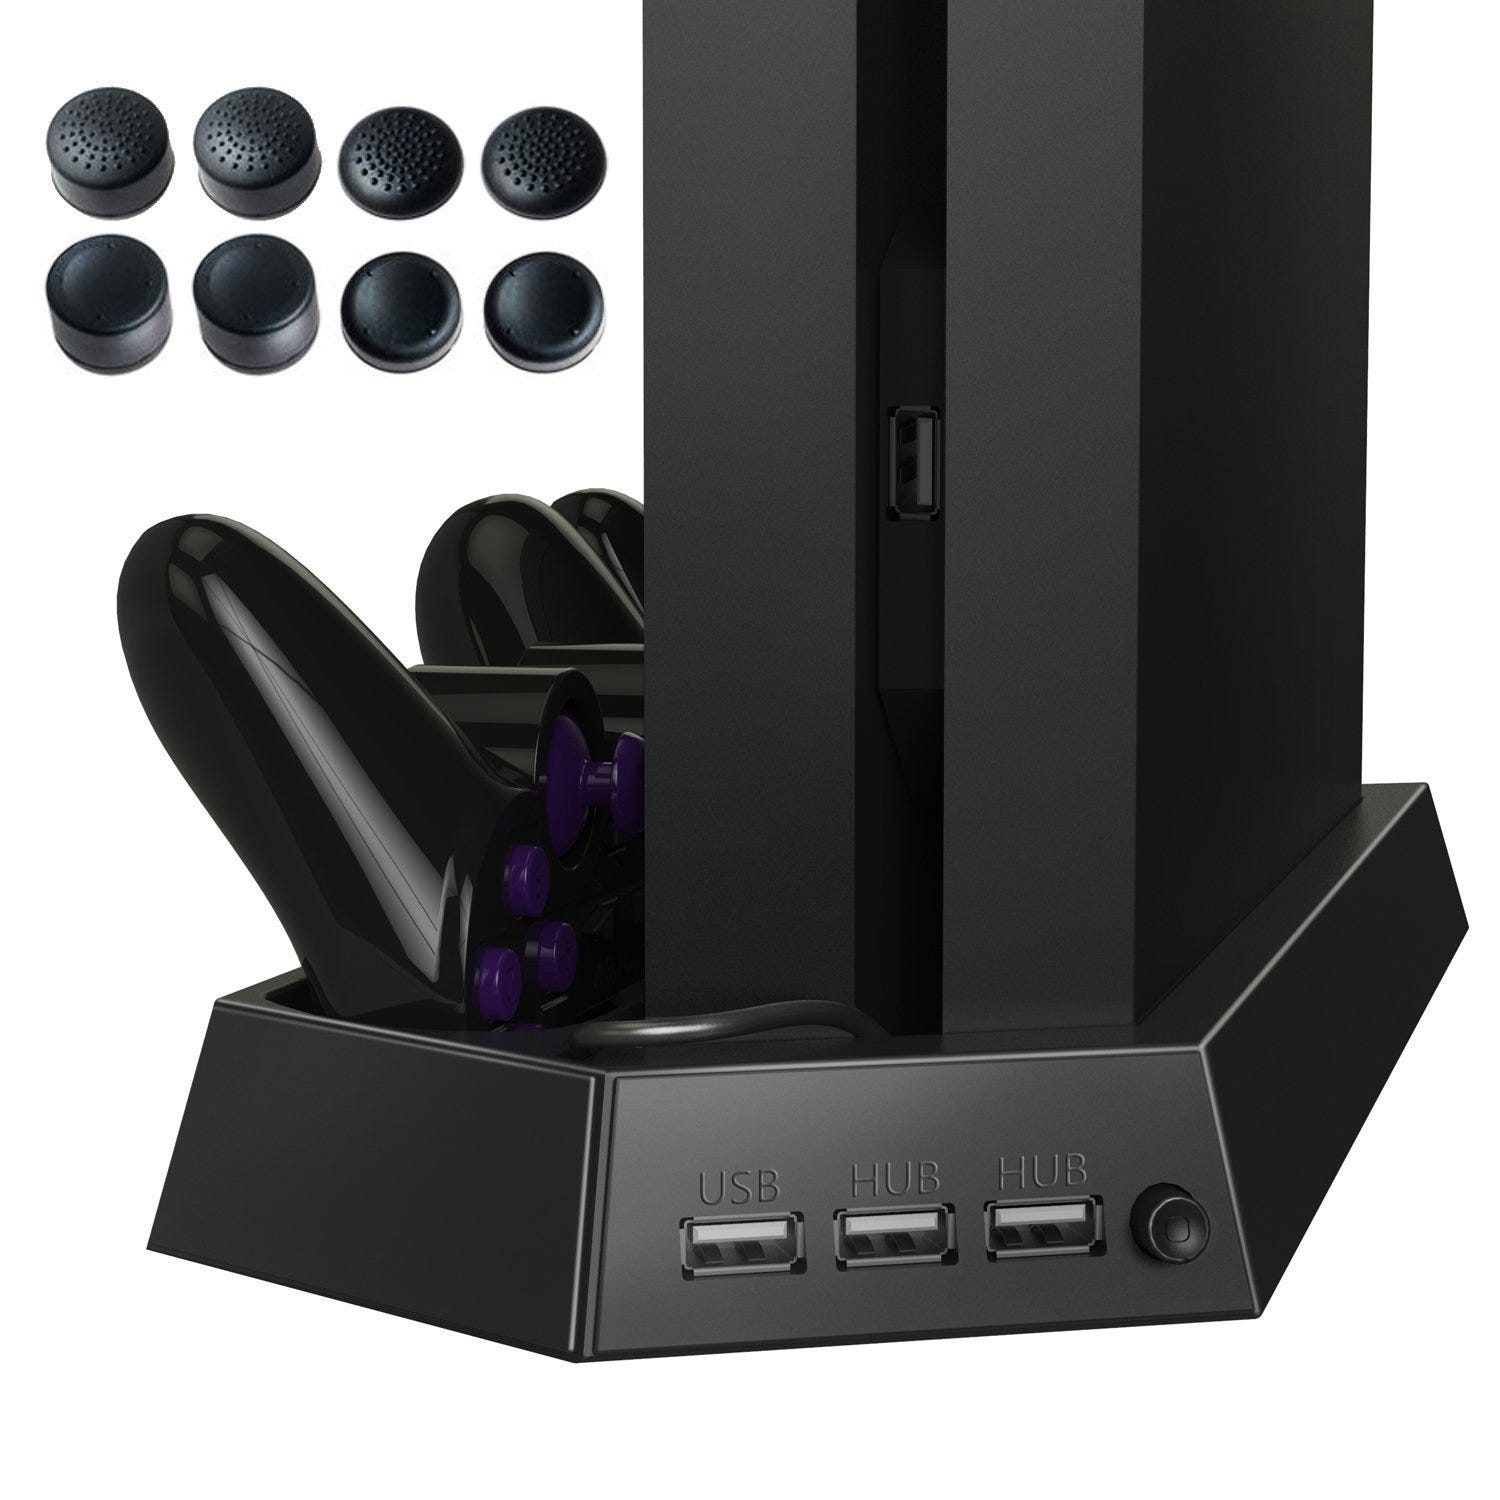 ps4 vertical stand version 1